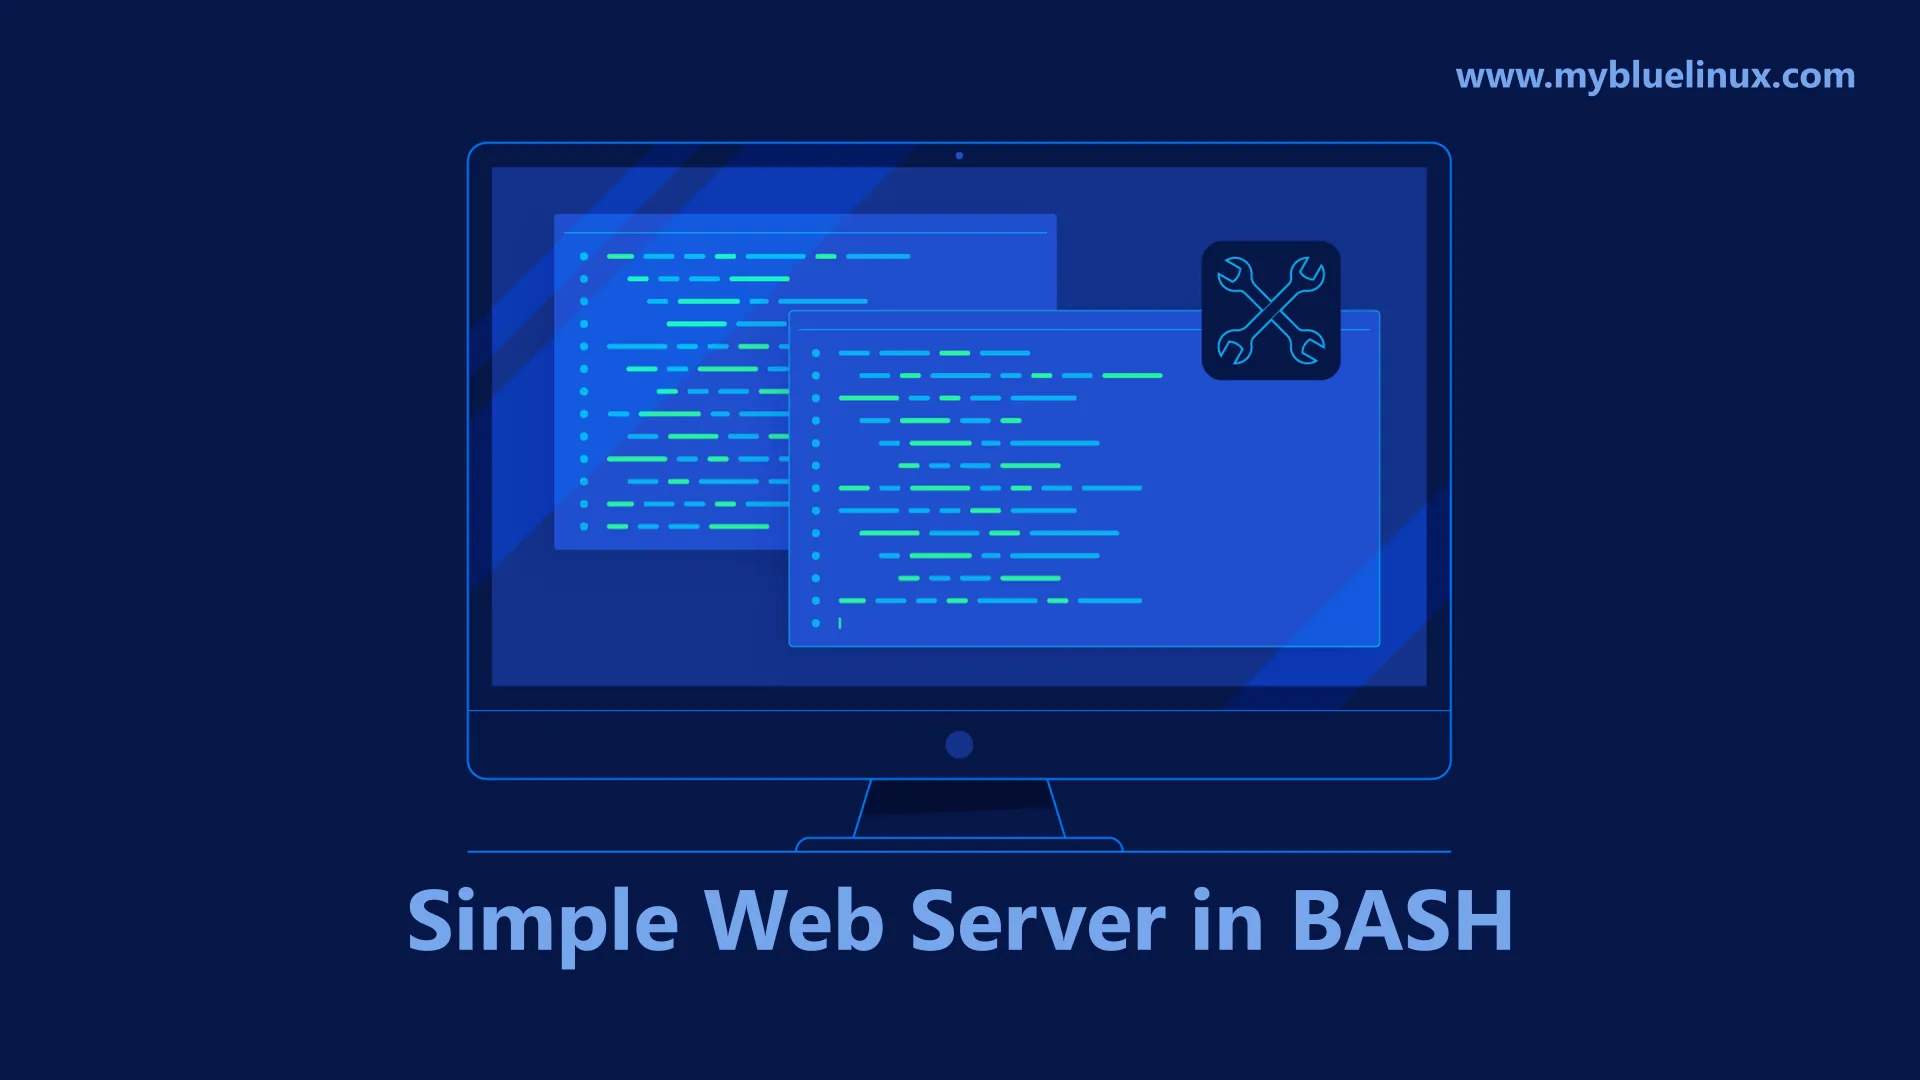 Webserver in bash - execute bash command